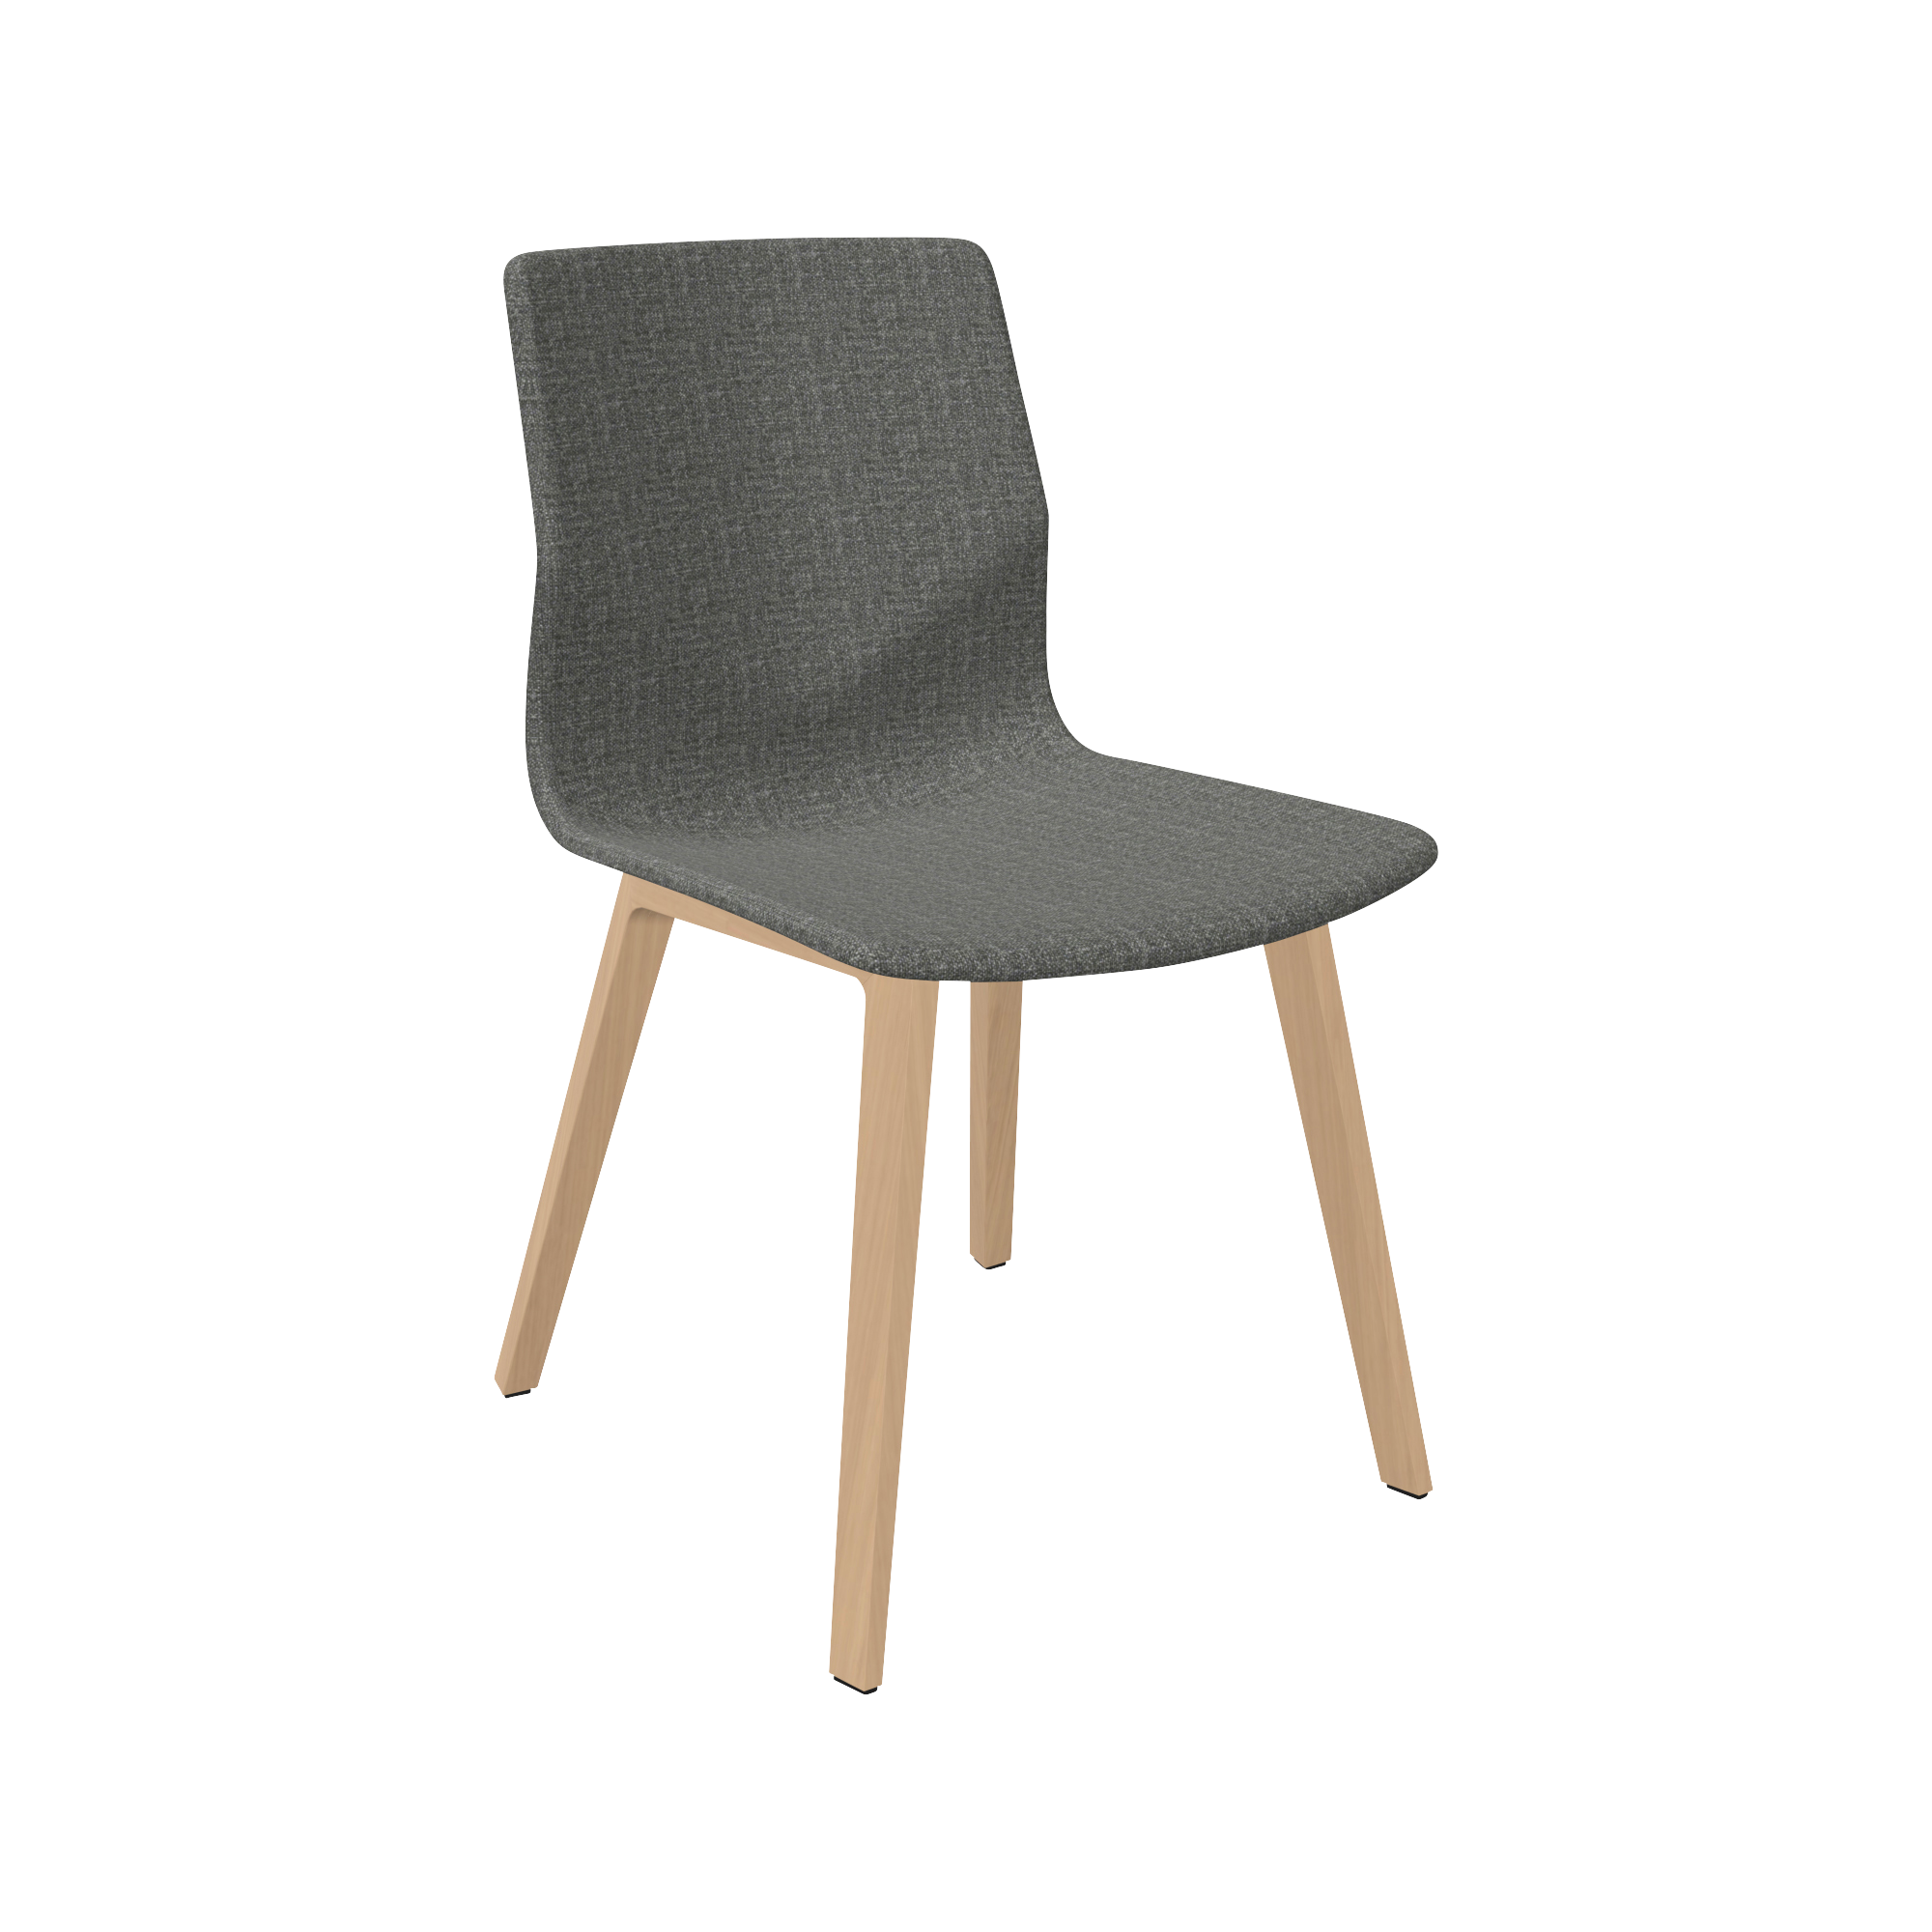 A grey dining chair with wooden legs.